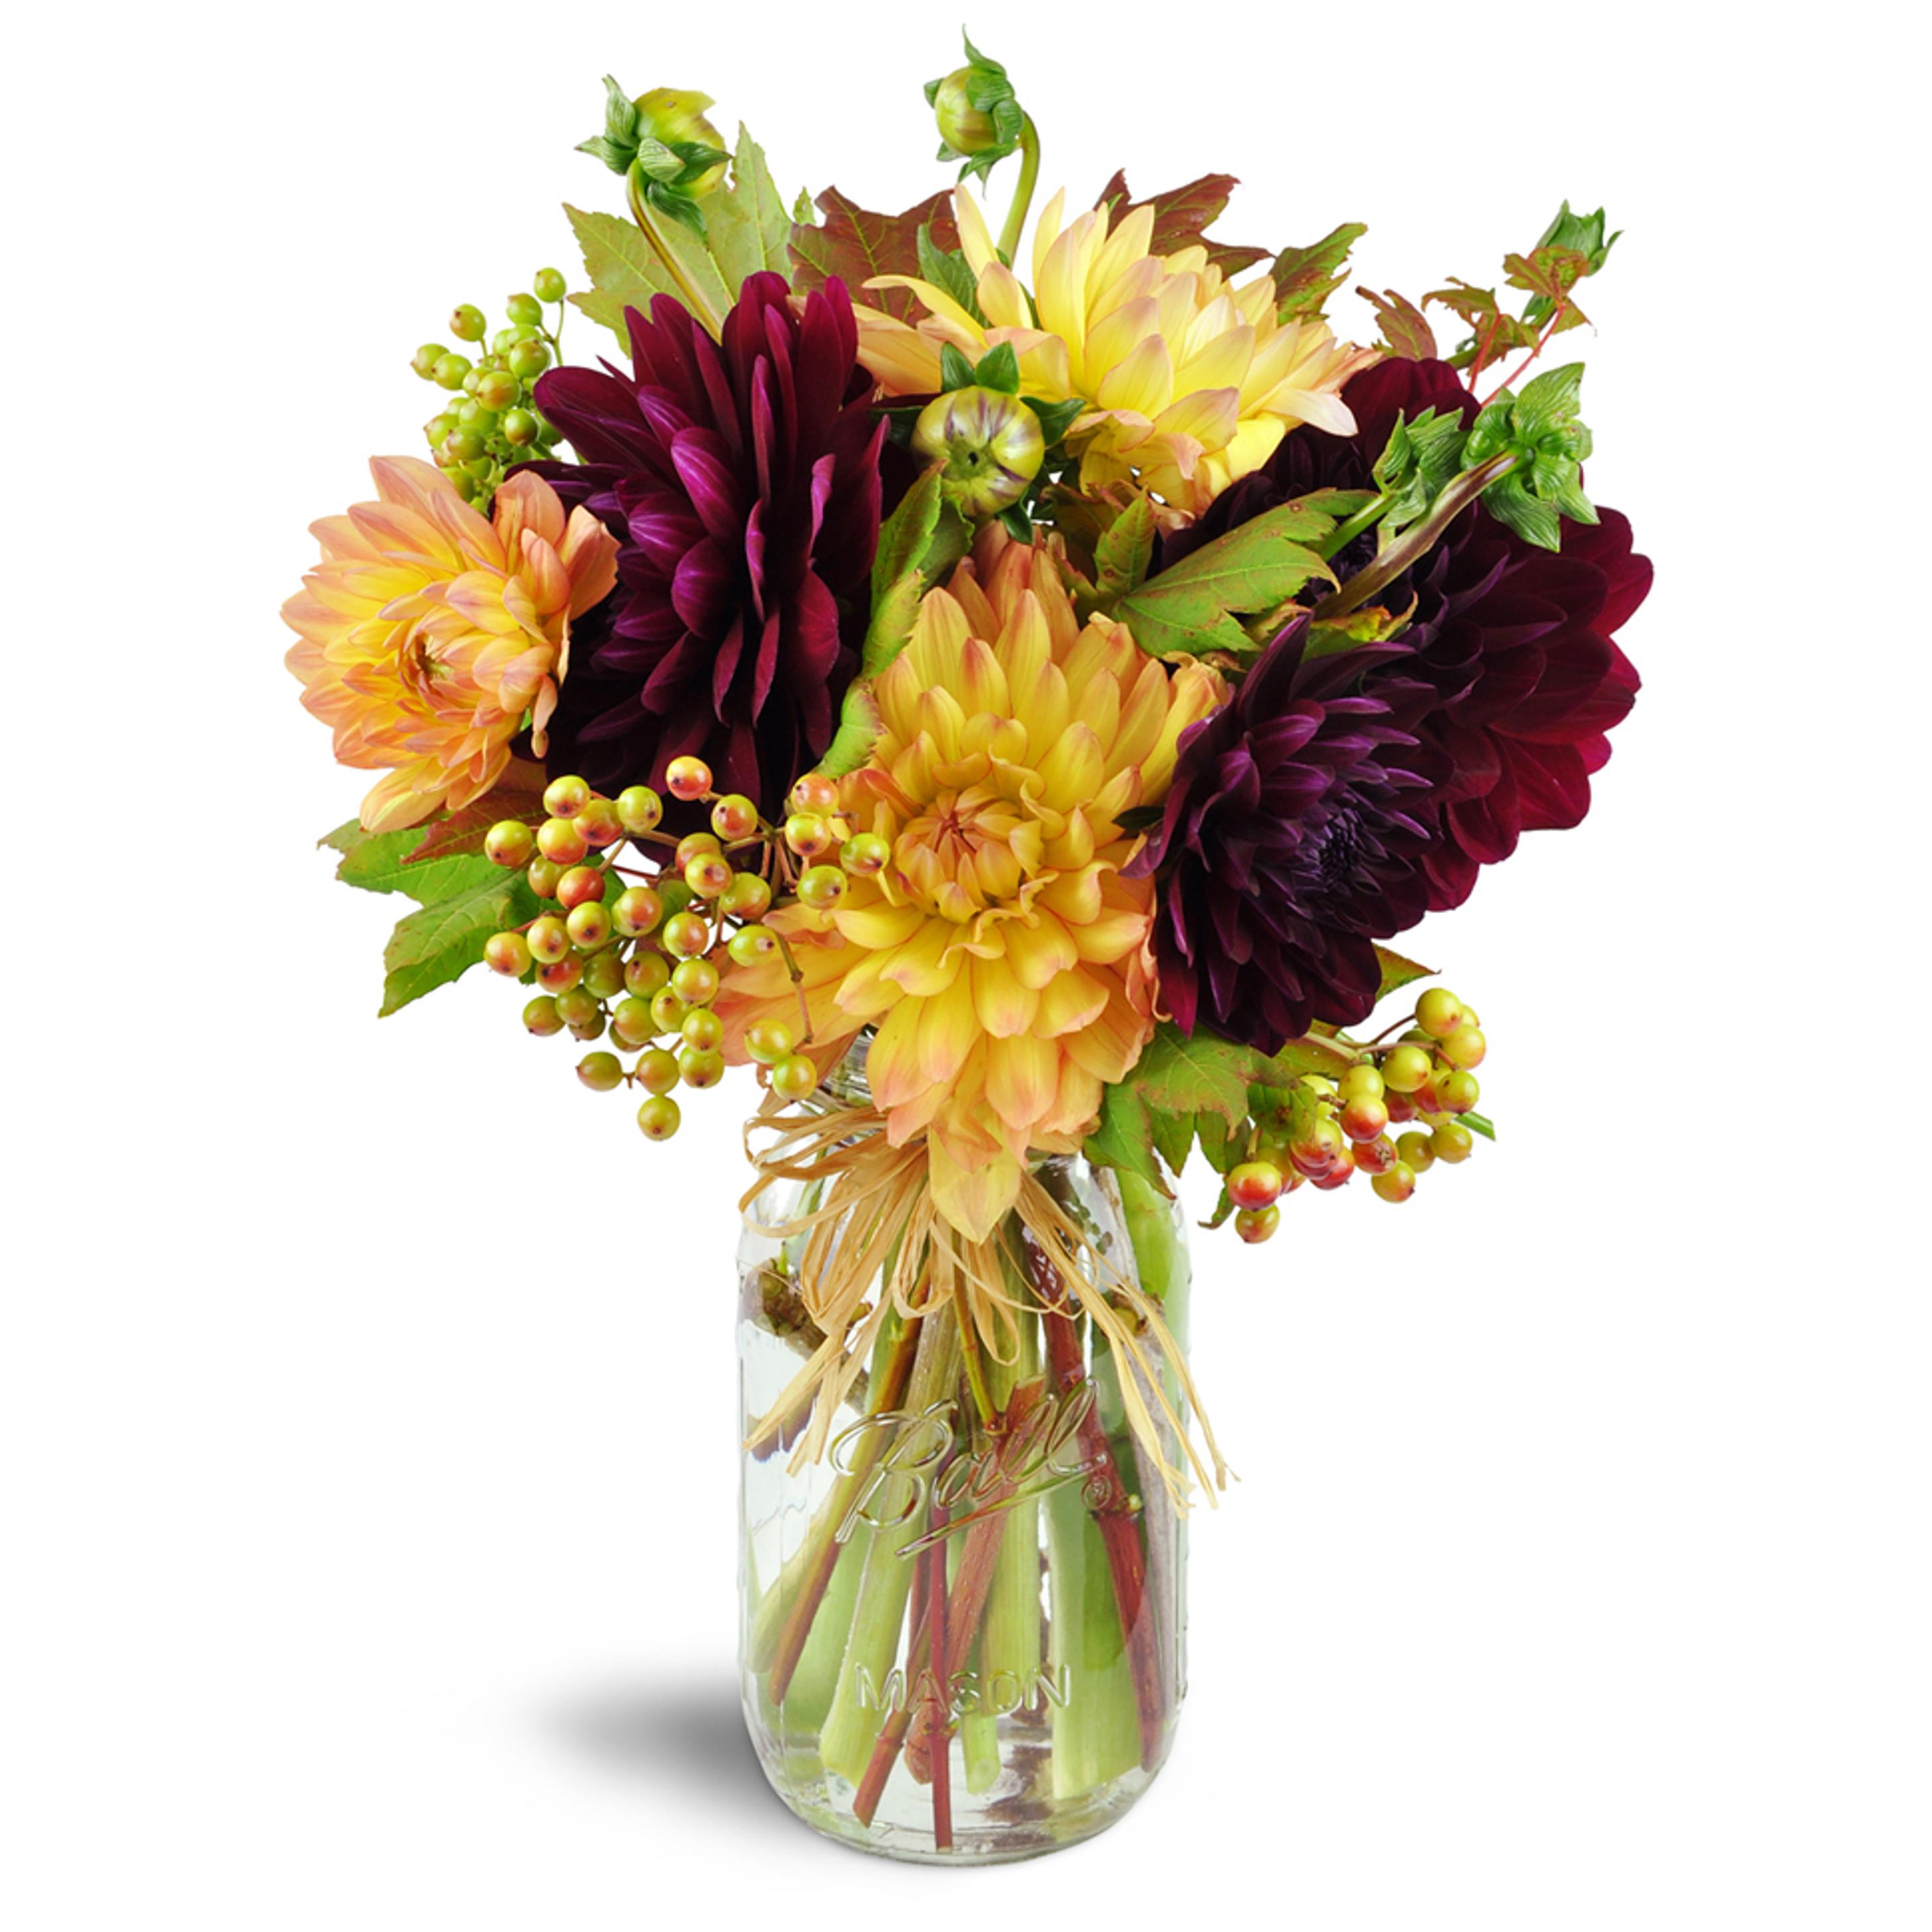 A beautiful unique arrangement in a mason jar with orange and deep red flowers